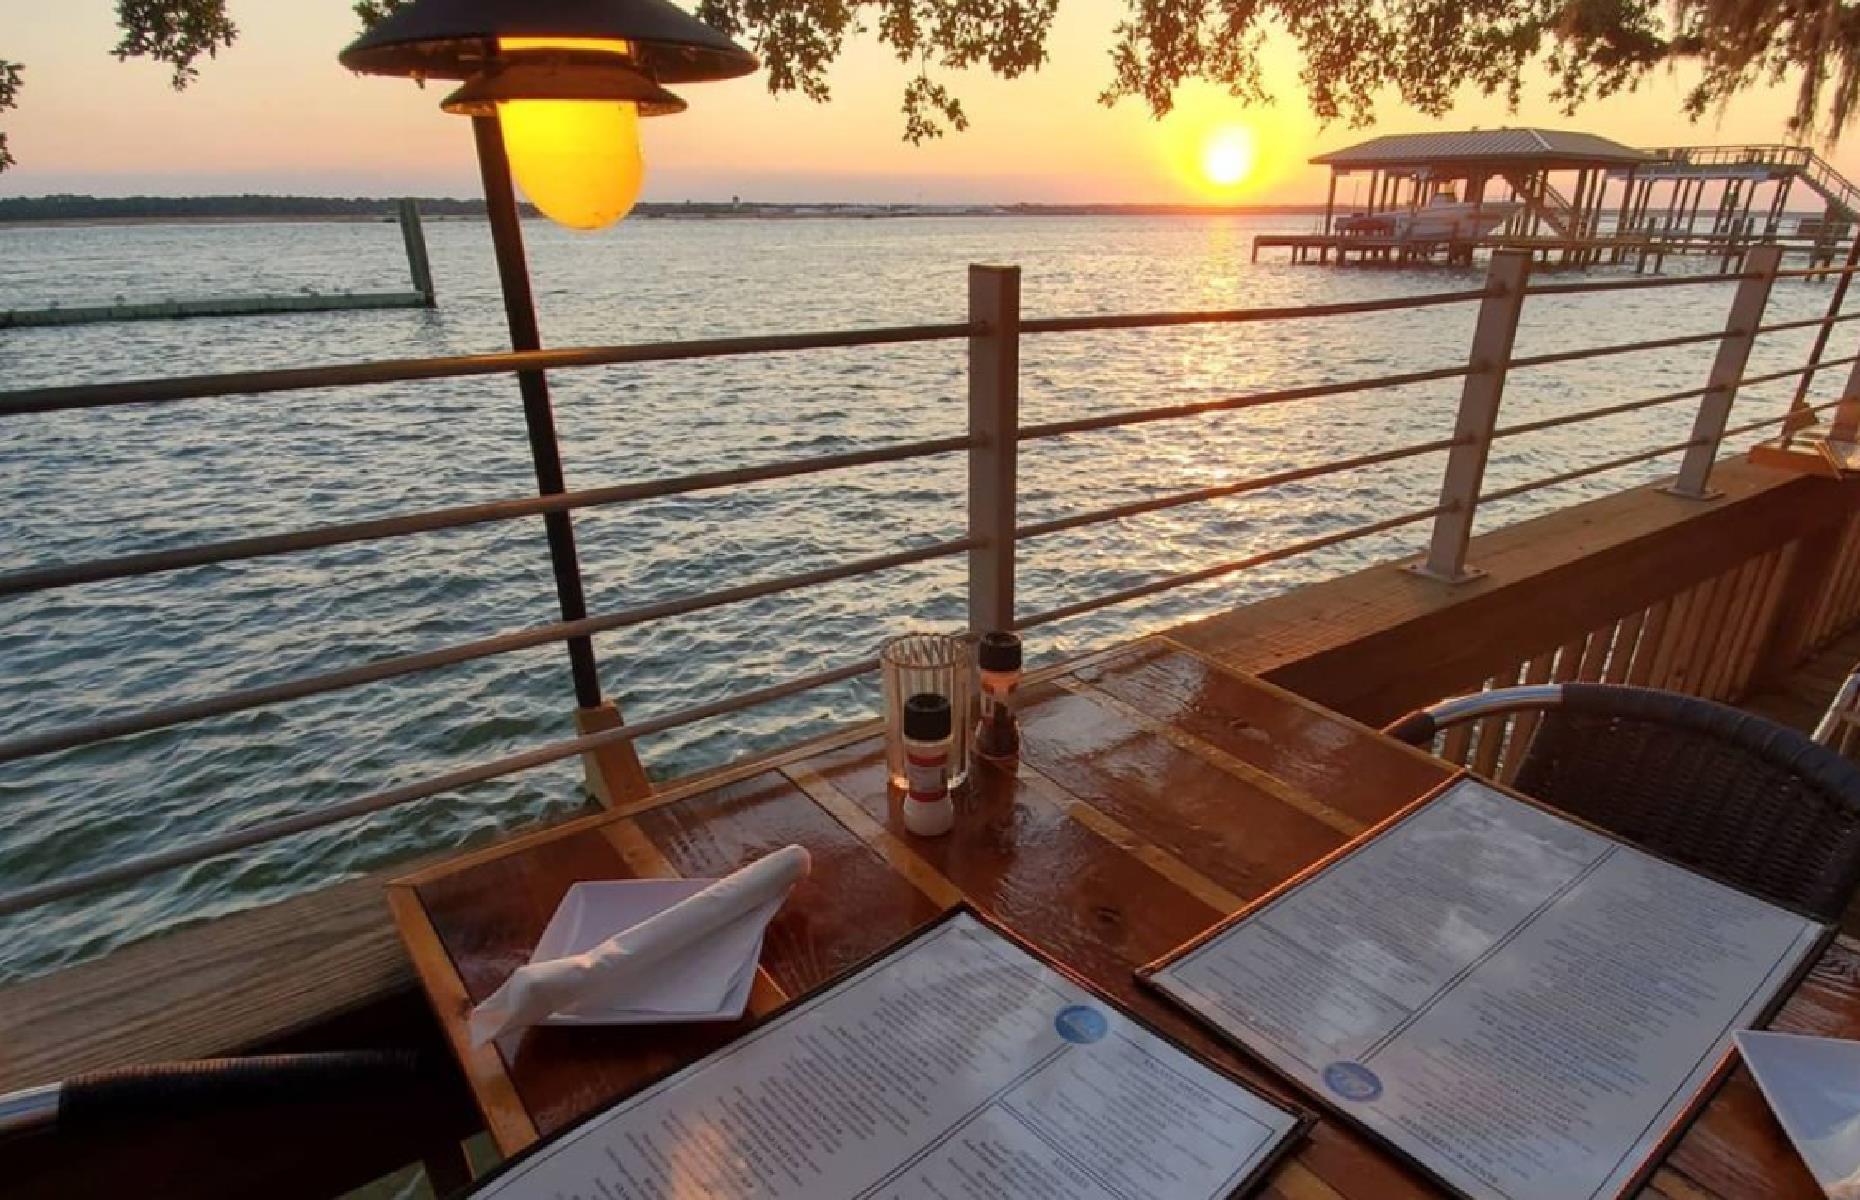 <p>There are few more special spots for watching the sun go down than Cap’s on the Water, which has tables scattered around the huge outdoor deck and jetty by the Intracoastal Waterway. Trees provide shade and make the restaurant, which specializes in seafood with Southern and Mediterranean flavors, look even lovelier. The indoor areas haven’t been neglected, though, with raffia booths and plush sofa-style seating, gorgeous light fittings and wall lamps, and windows that can be thrust open to allow the balmy breeze in on warm nights.</p>